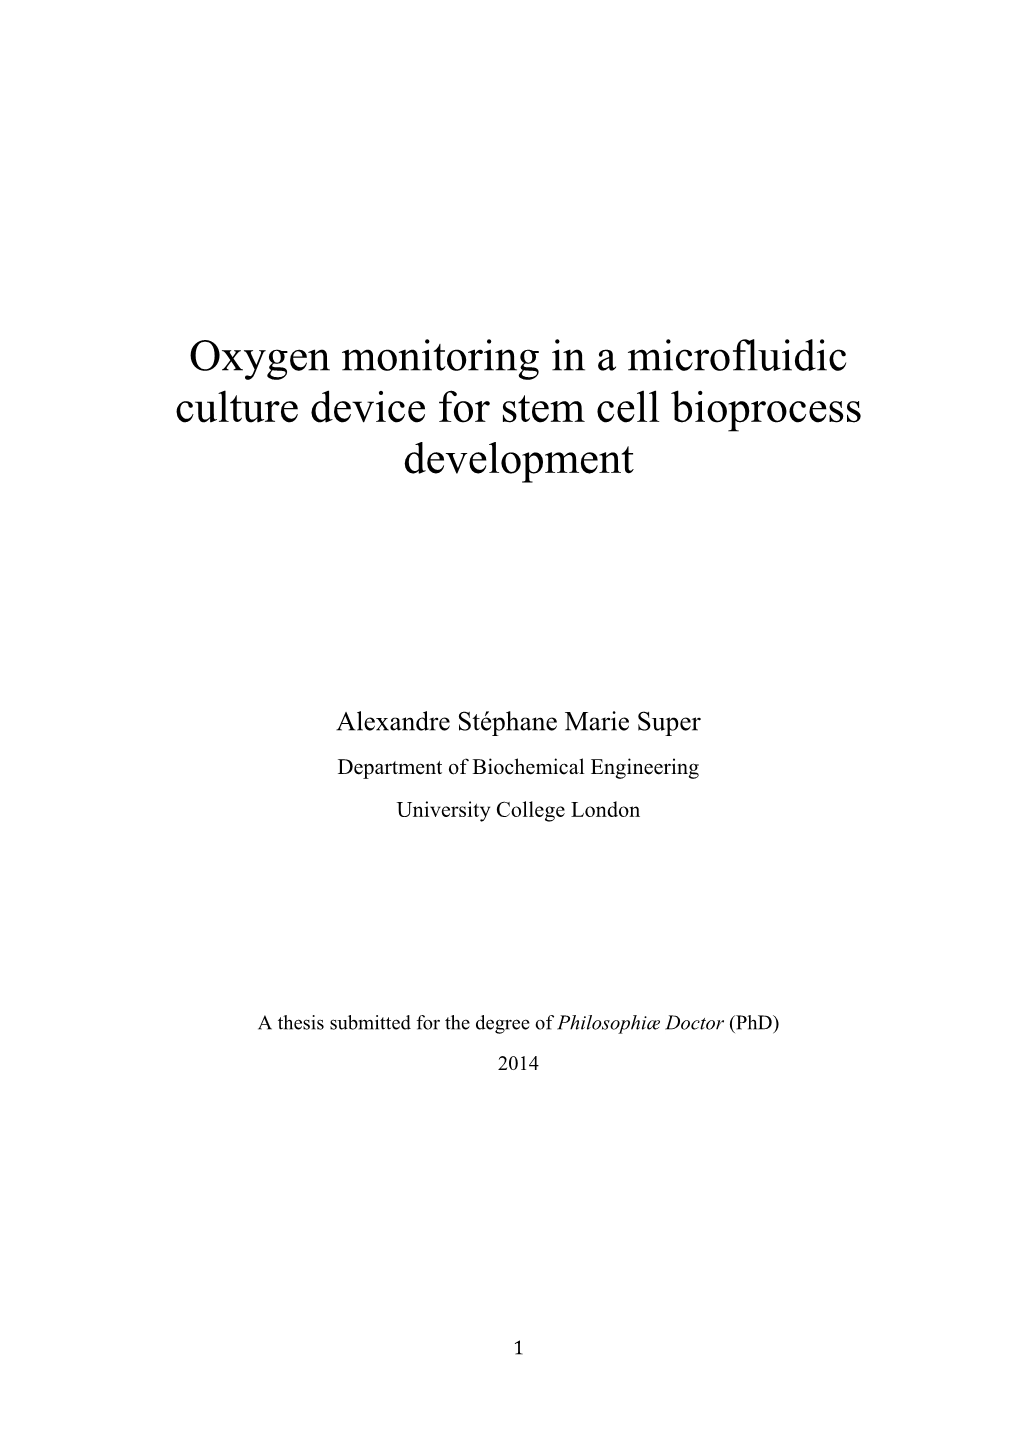 Oxygen Monitoring in a Microfluidic Culture Device for Stem Cell Bioprocess Development